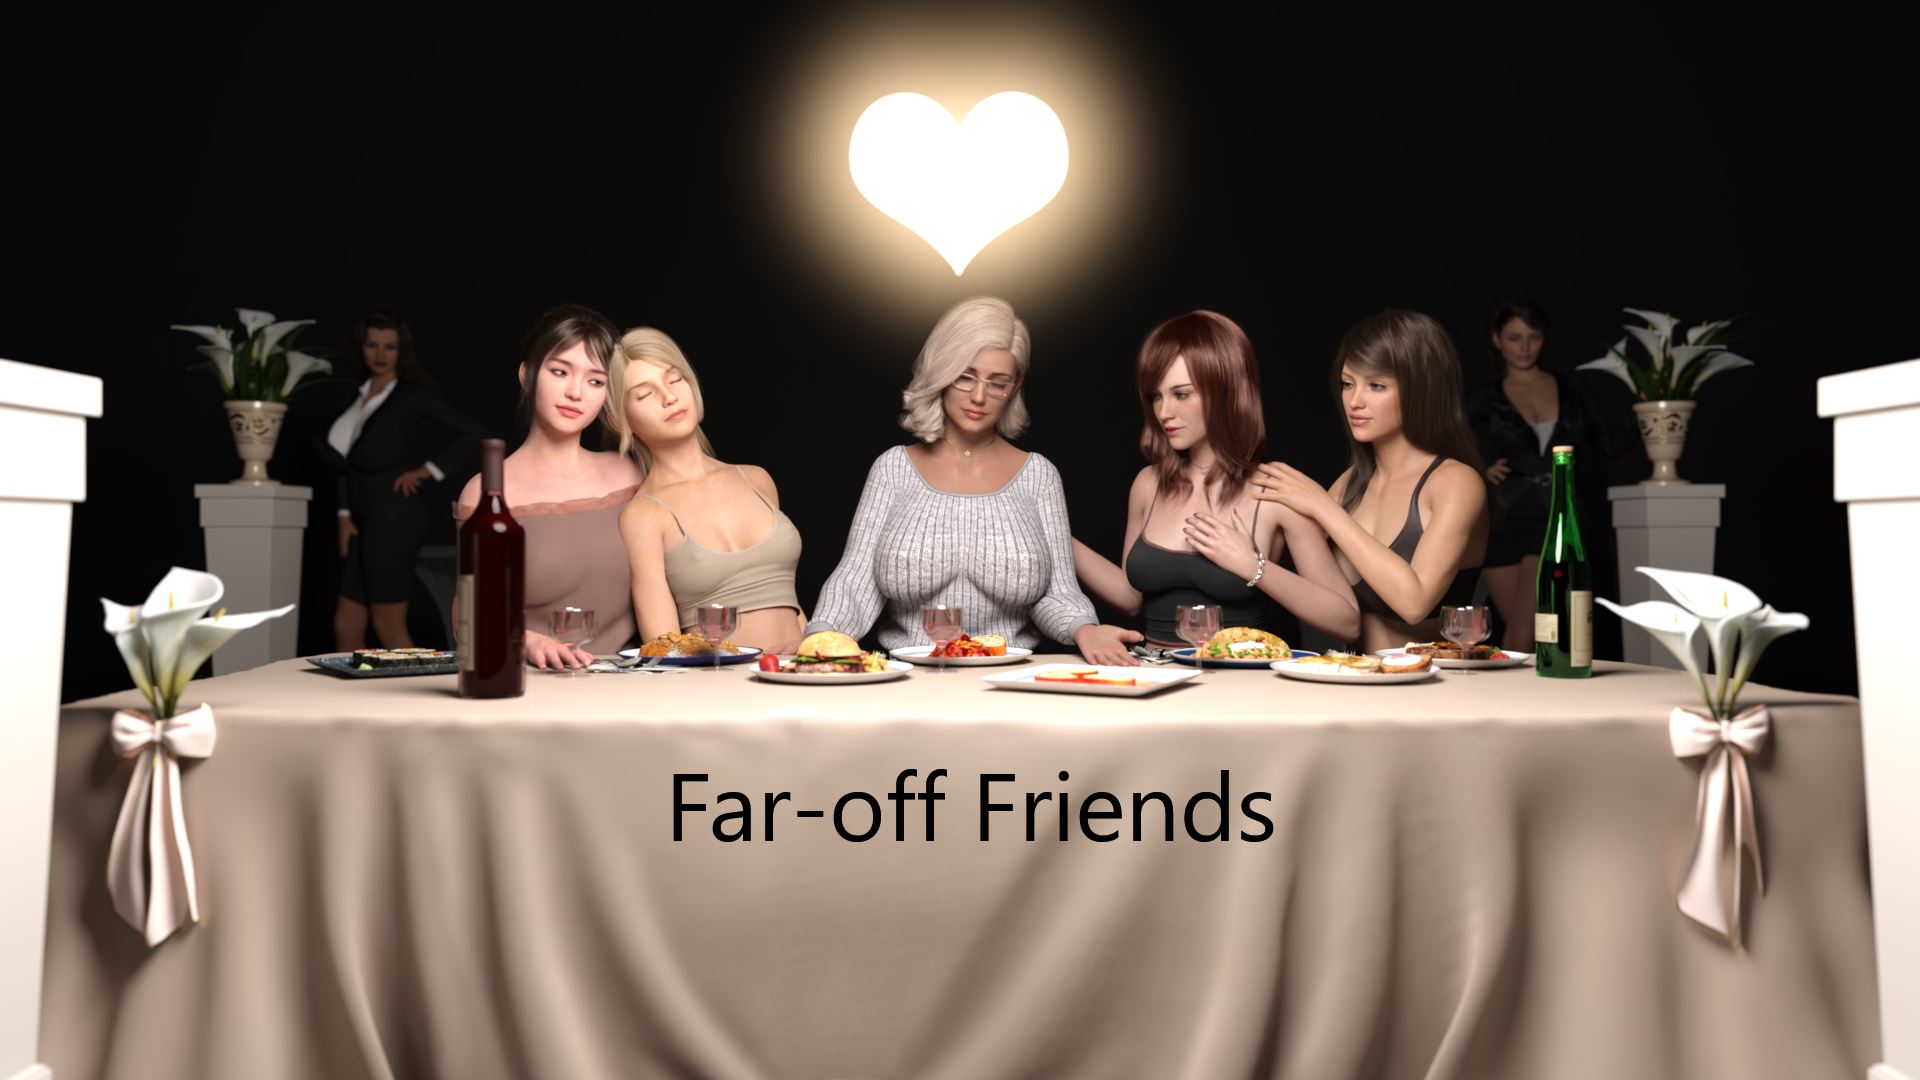 Free Sex 4mb Download - Far-Off Friends Ren'Py Porn Sex Game v.0.5 Download for Windows, MacOS,  Linux, Android